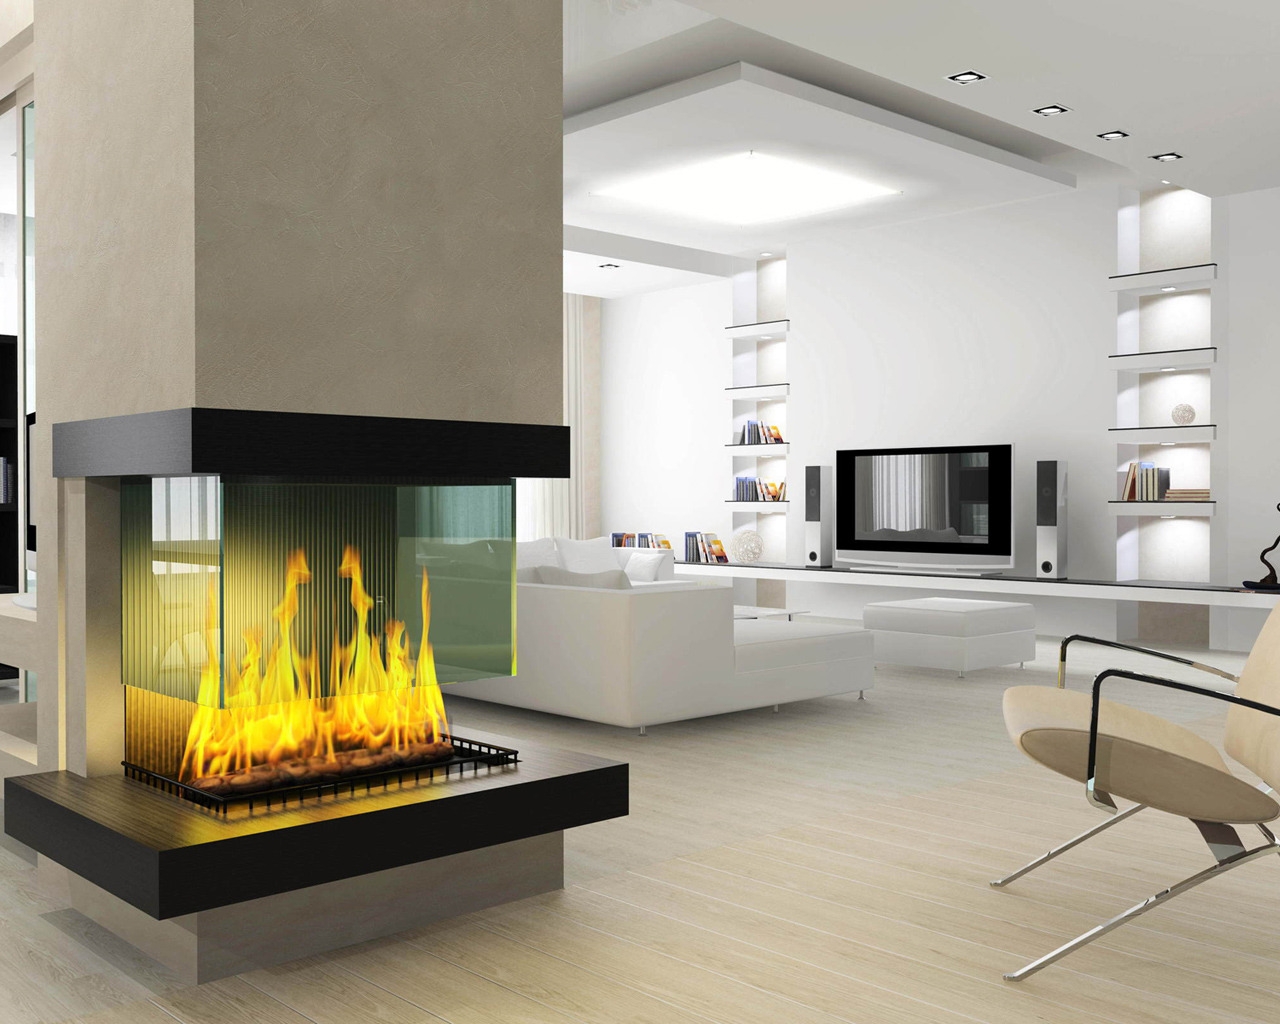 Fireplace for 1280 x 1024 resolution